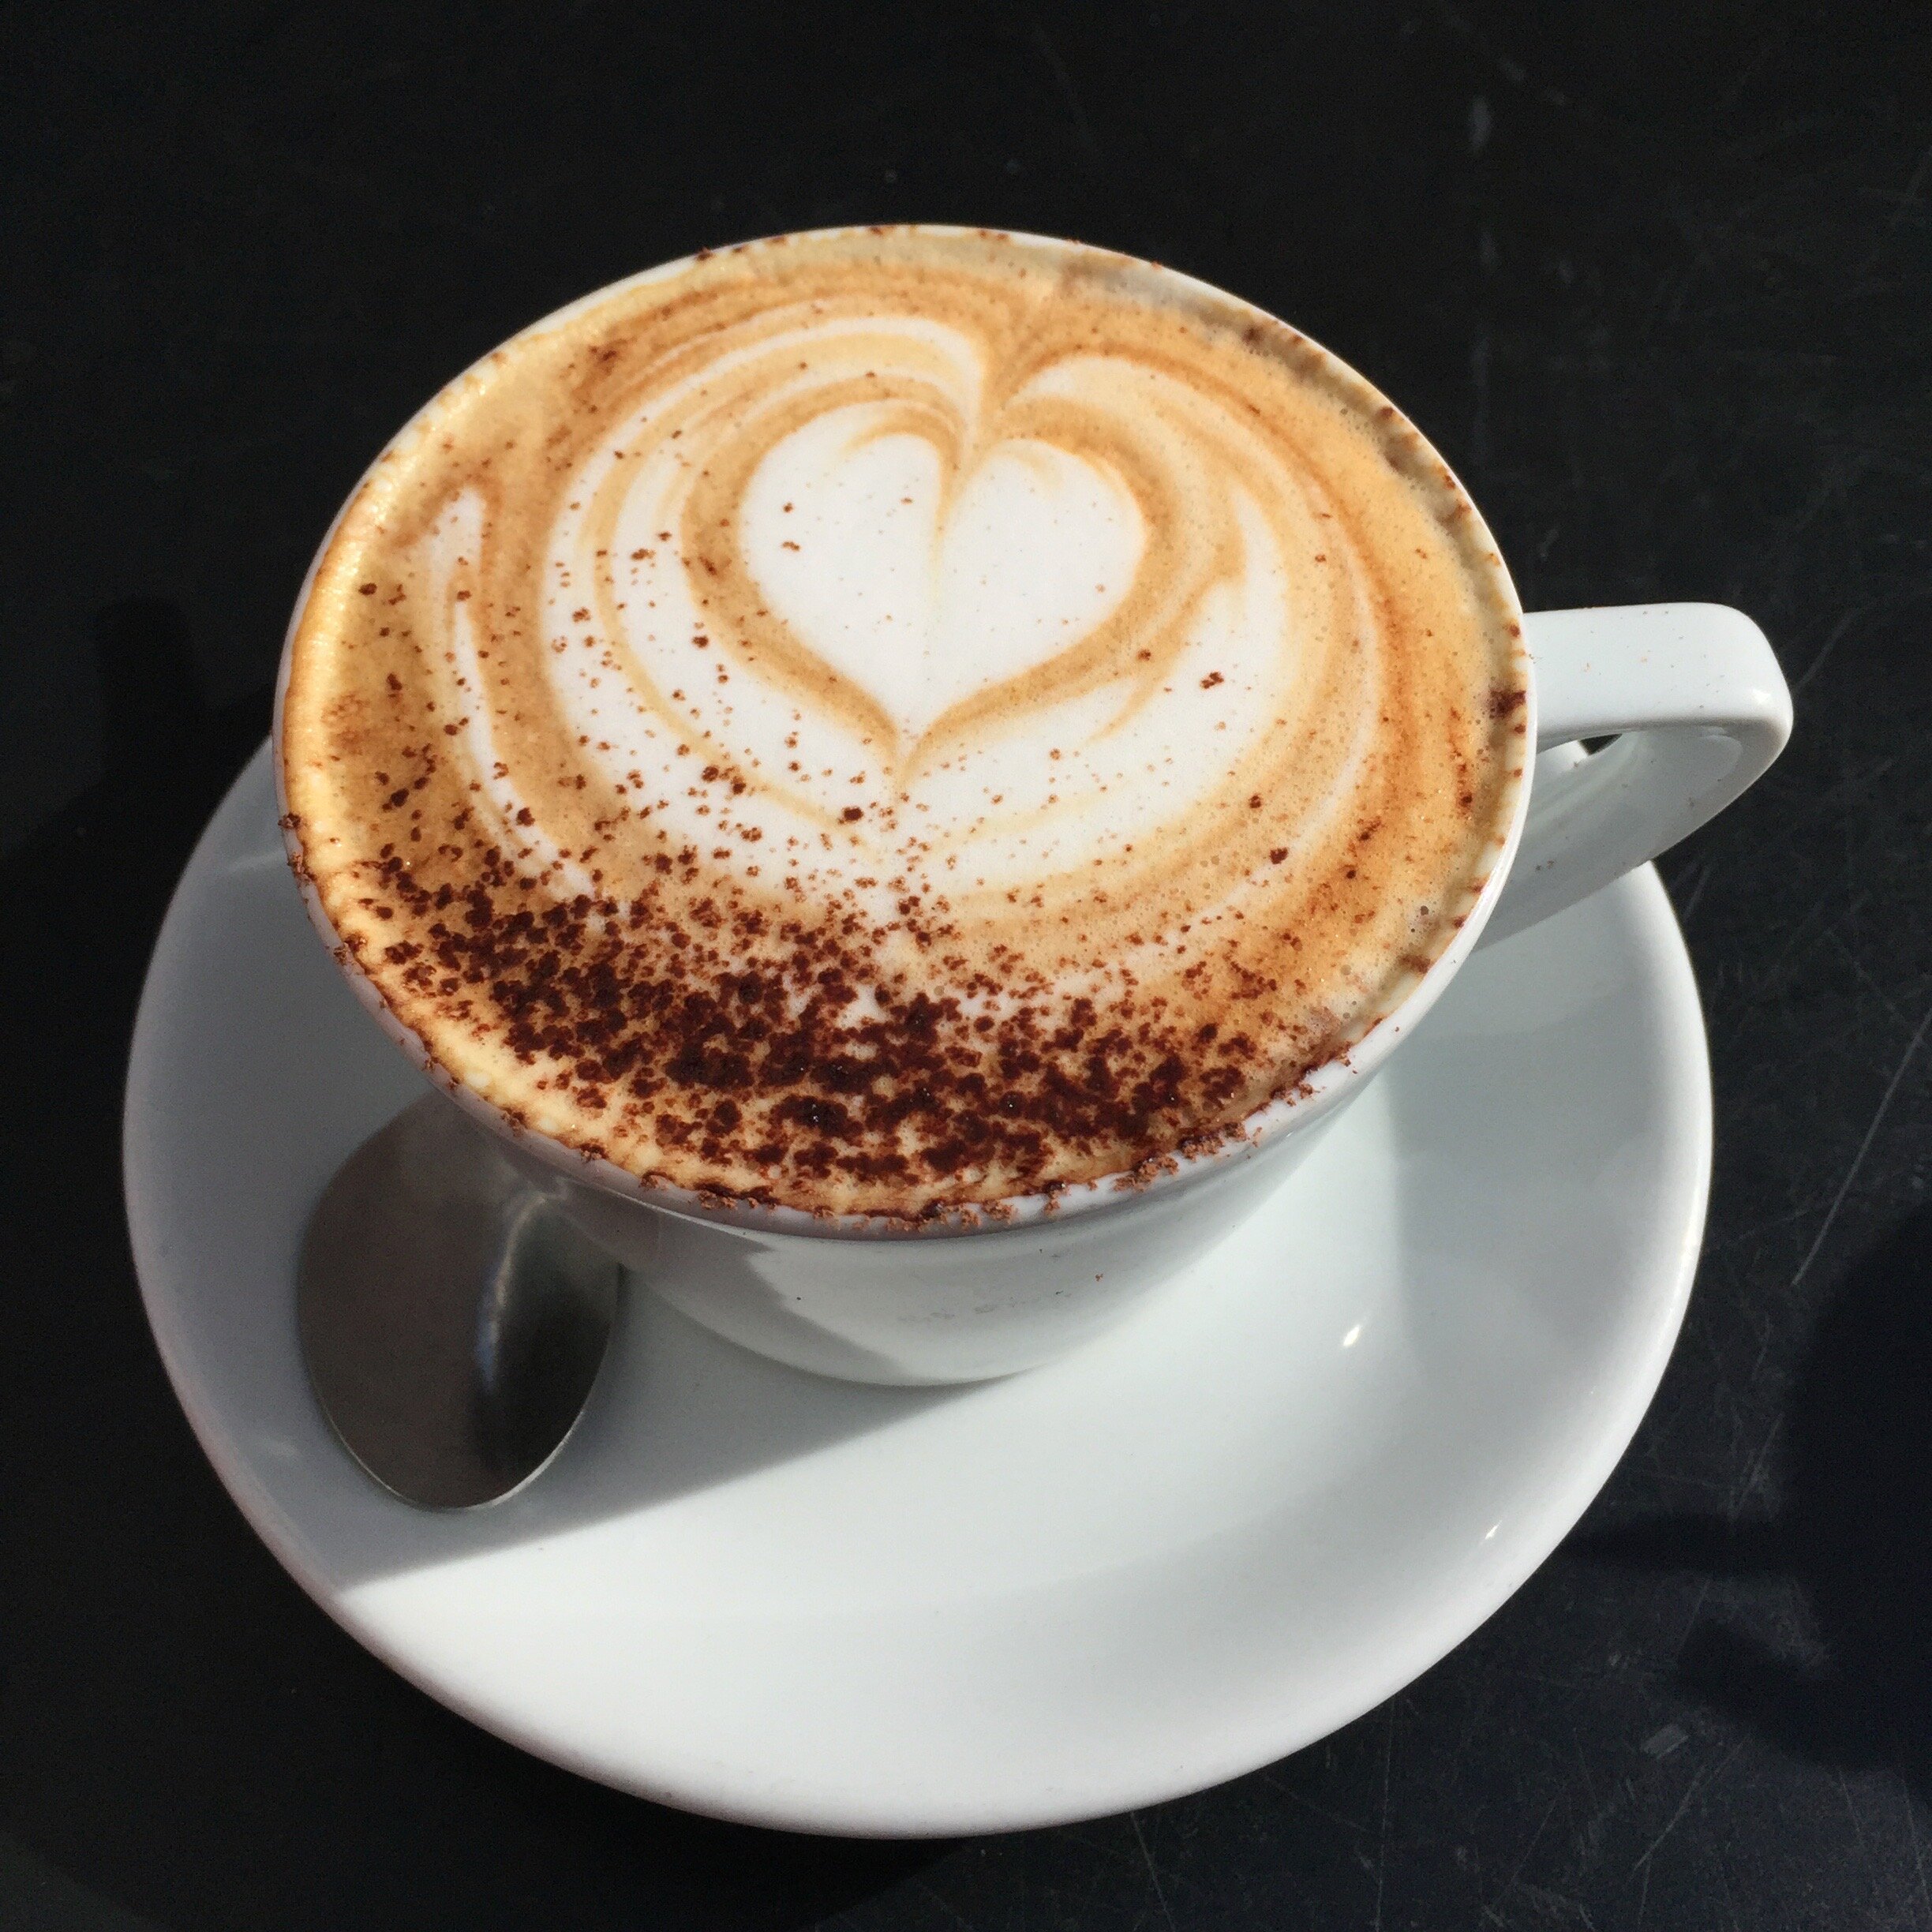 A cappuccino with love!